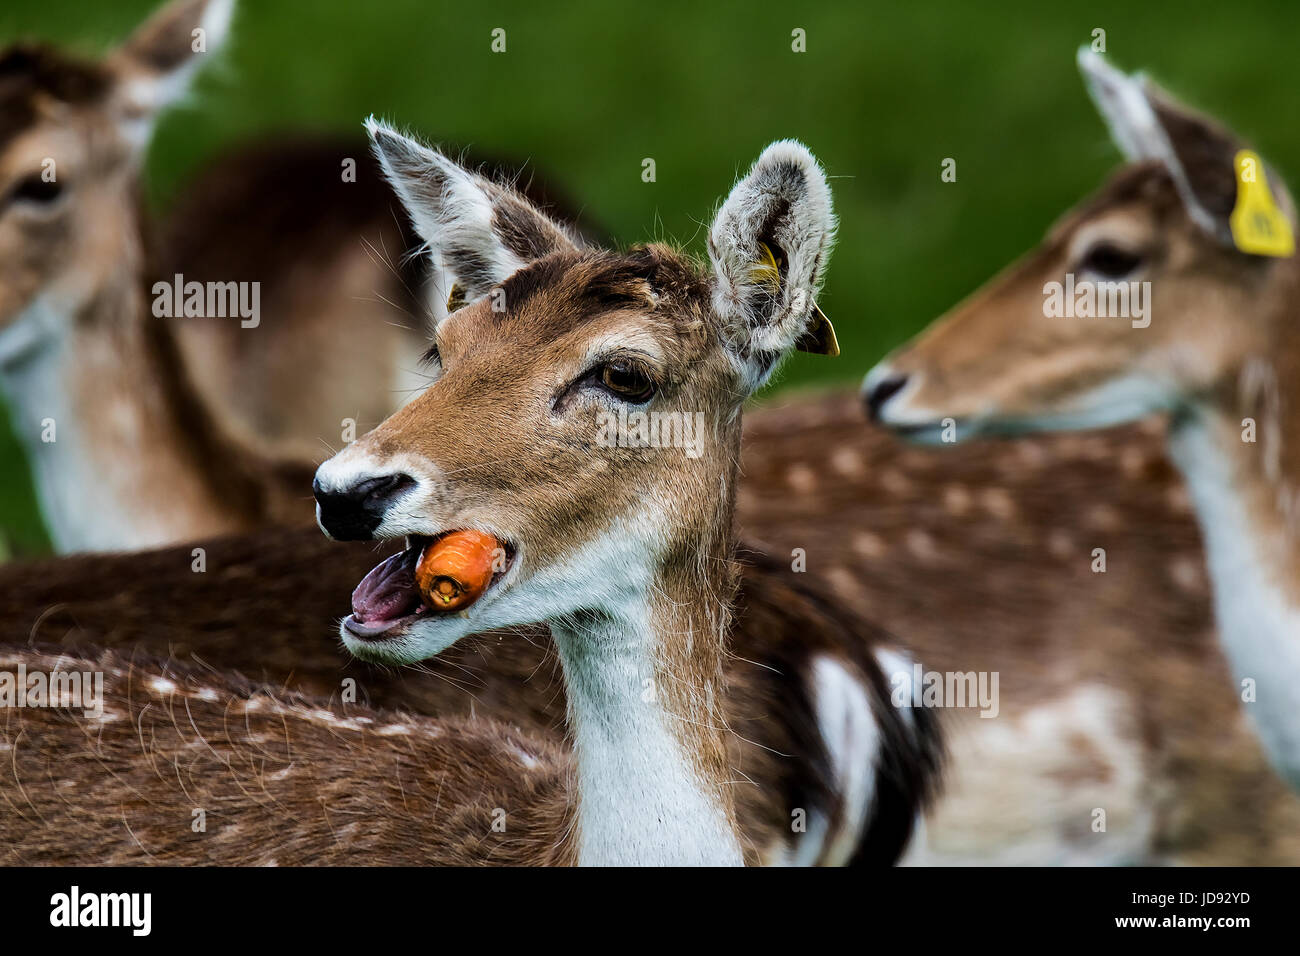 This Deer thinks it is Smoking the Carrot Stock Photo